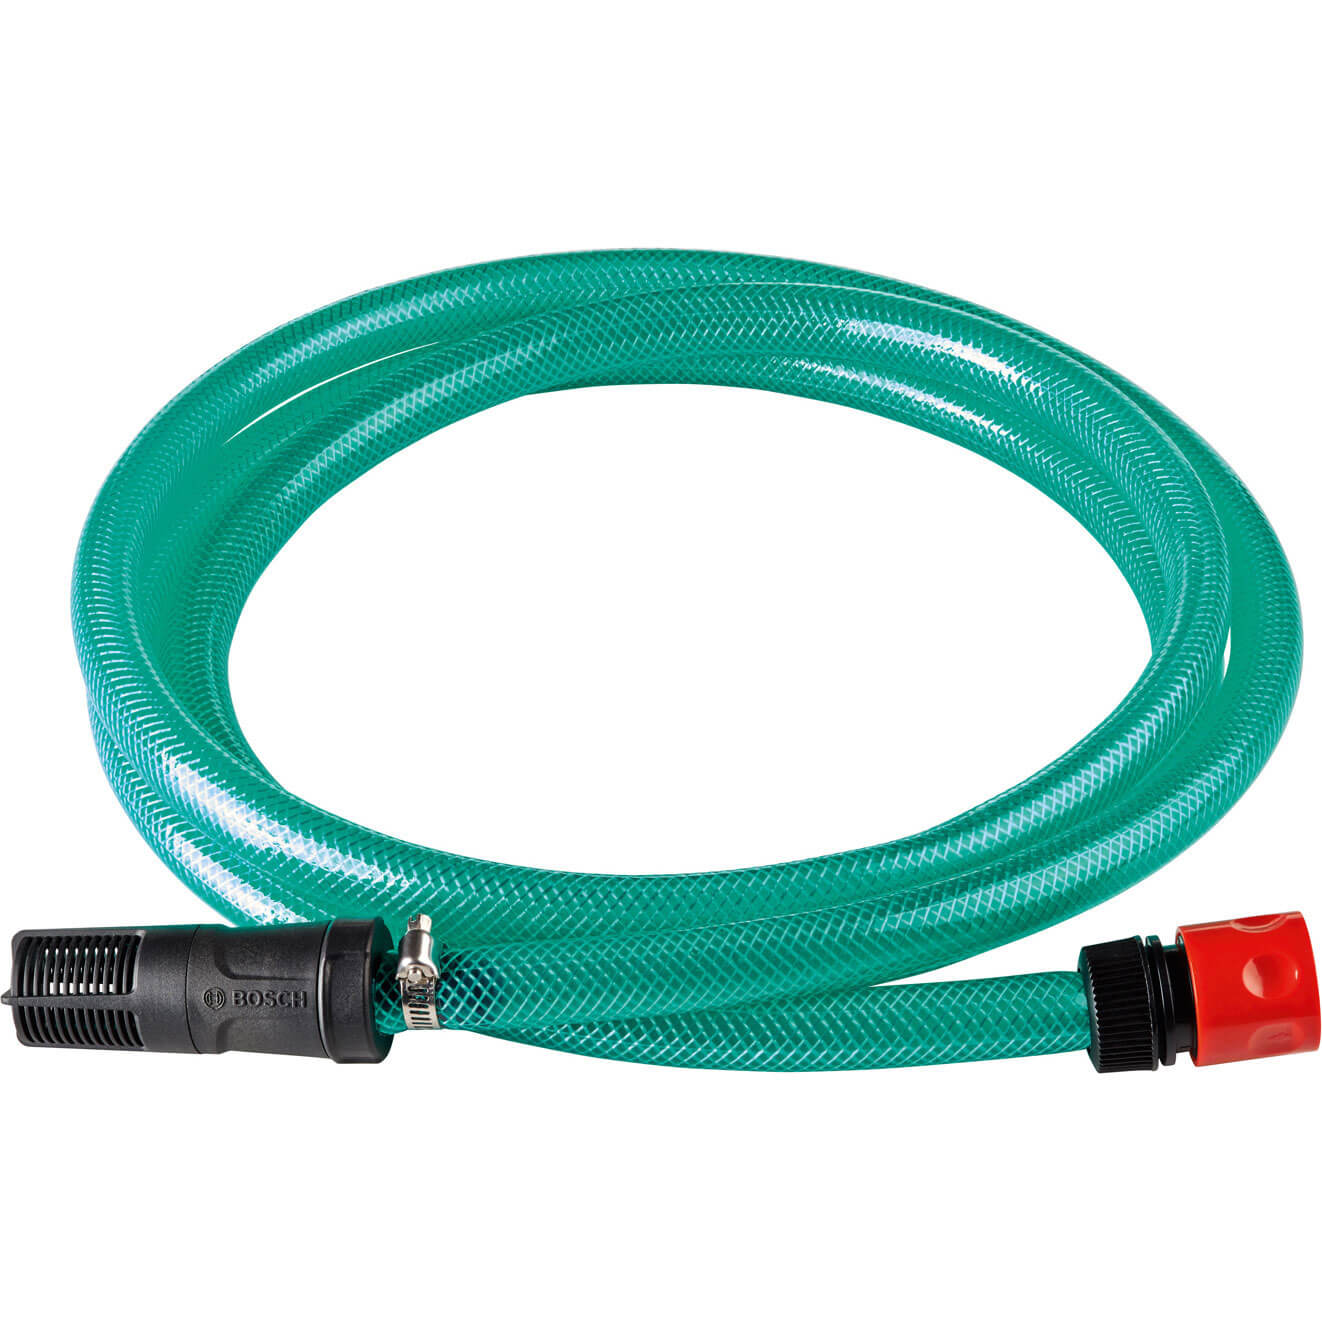 Image of Bosch Self Priming Suction Hose and Filter for AQT Pressure Washers 3m